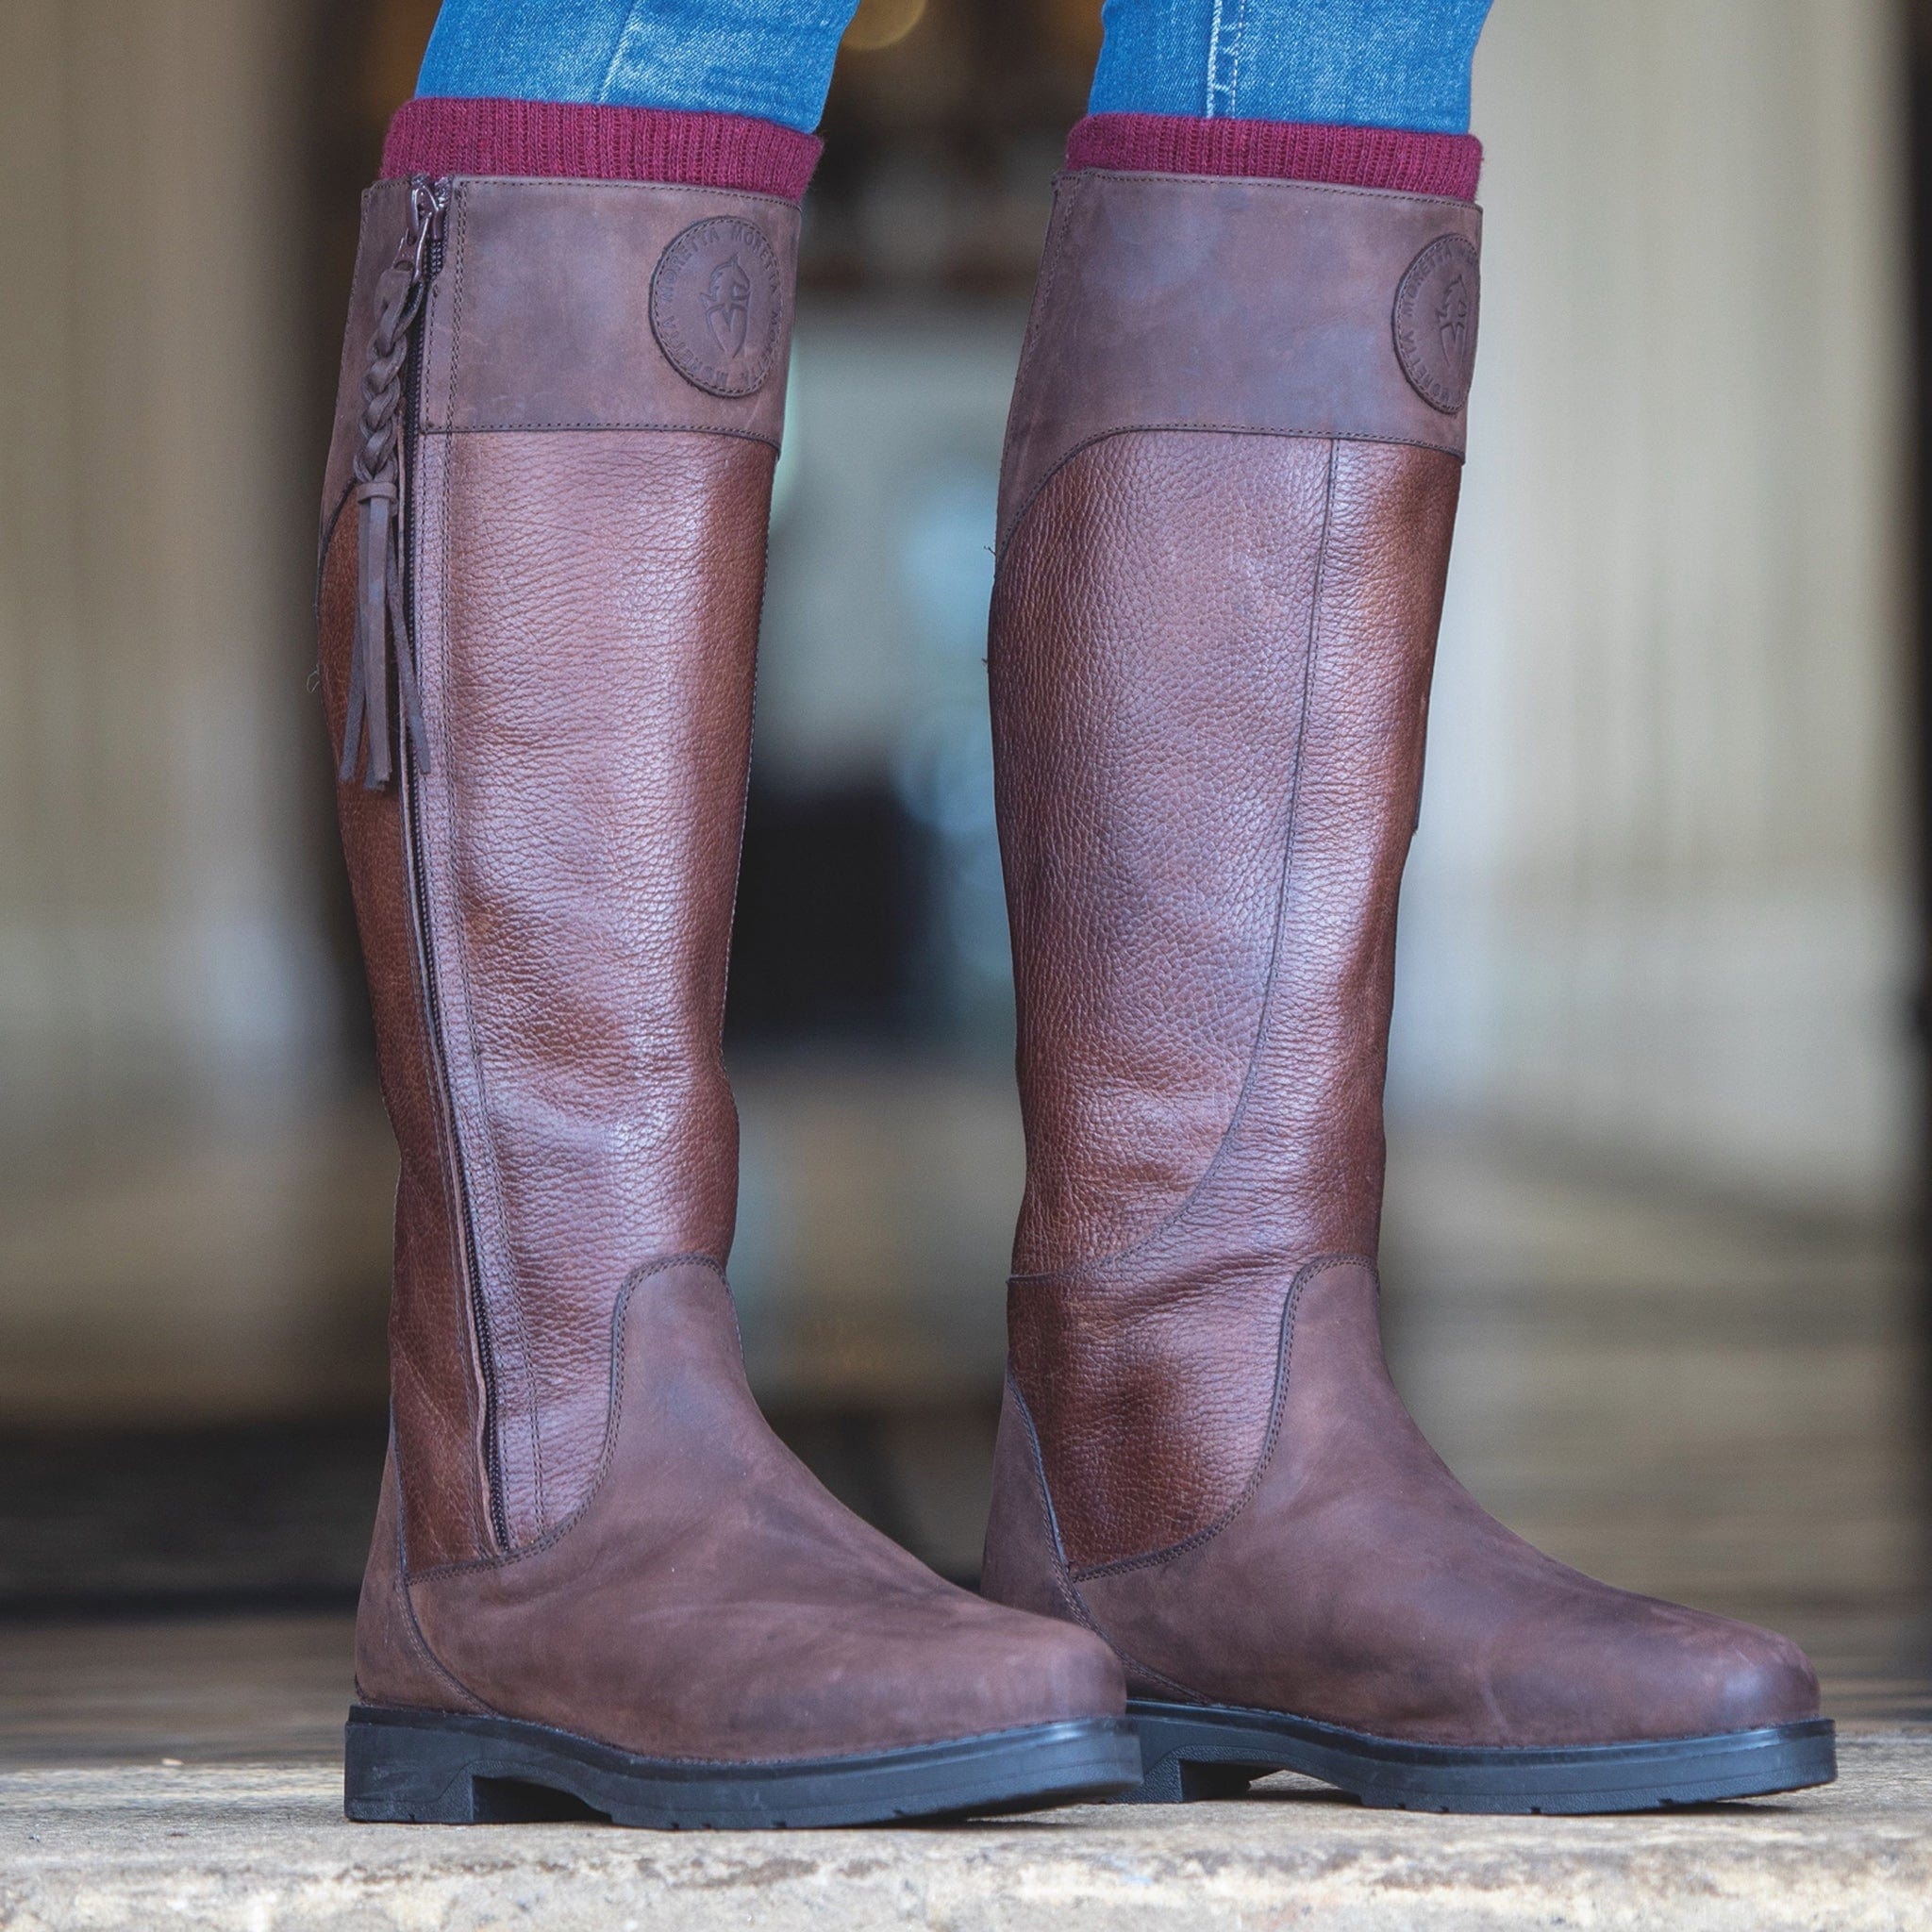 Moretta Pamina Country Boots 8240 Brown On Model